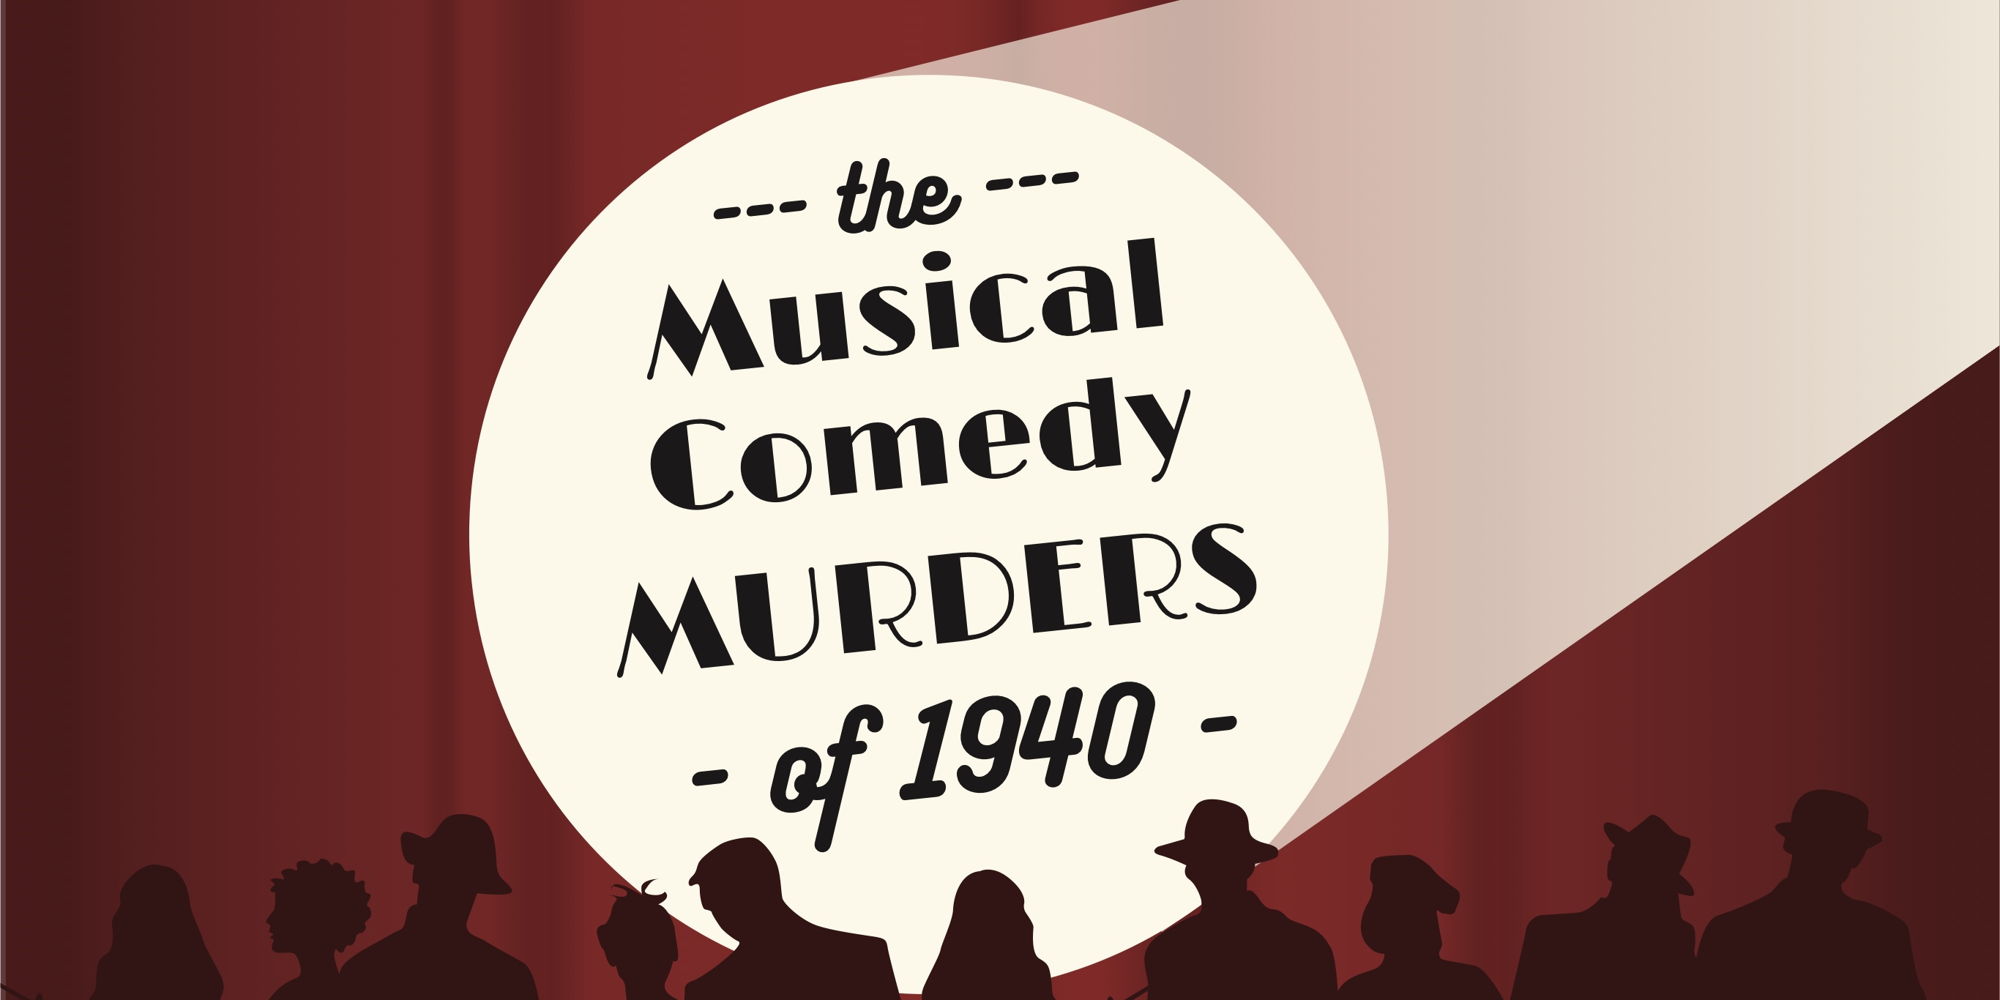 The Musical Comedy Murders of 1940 promotional image